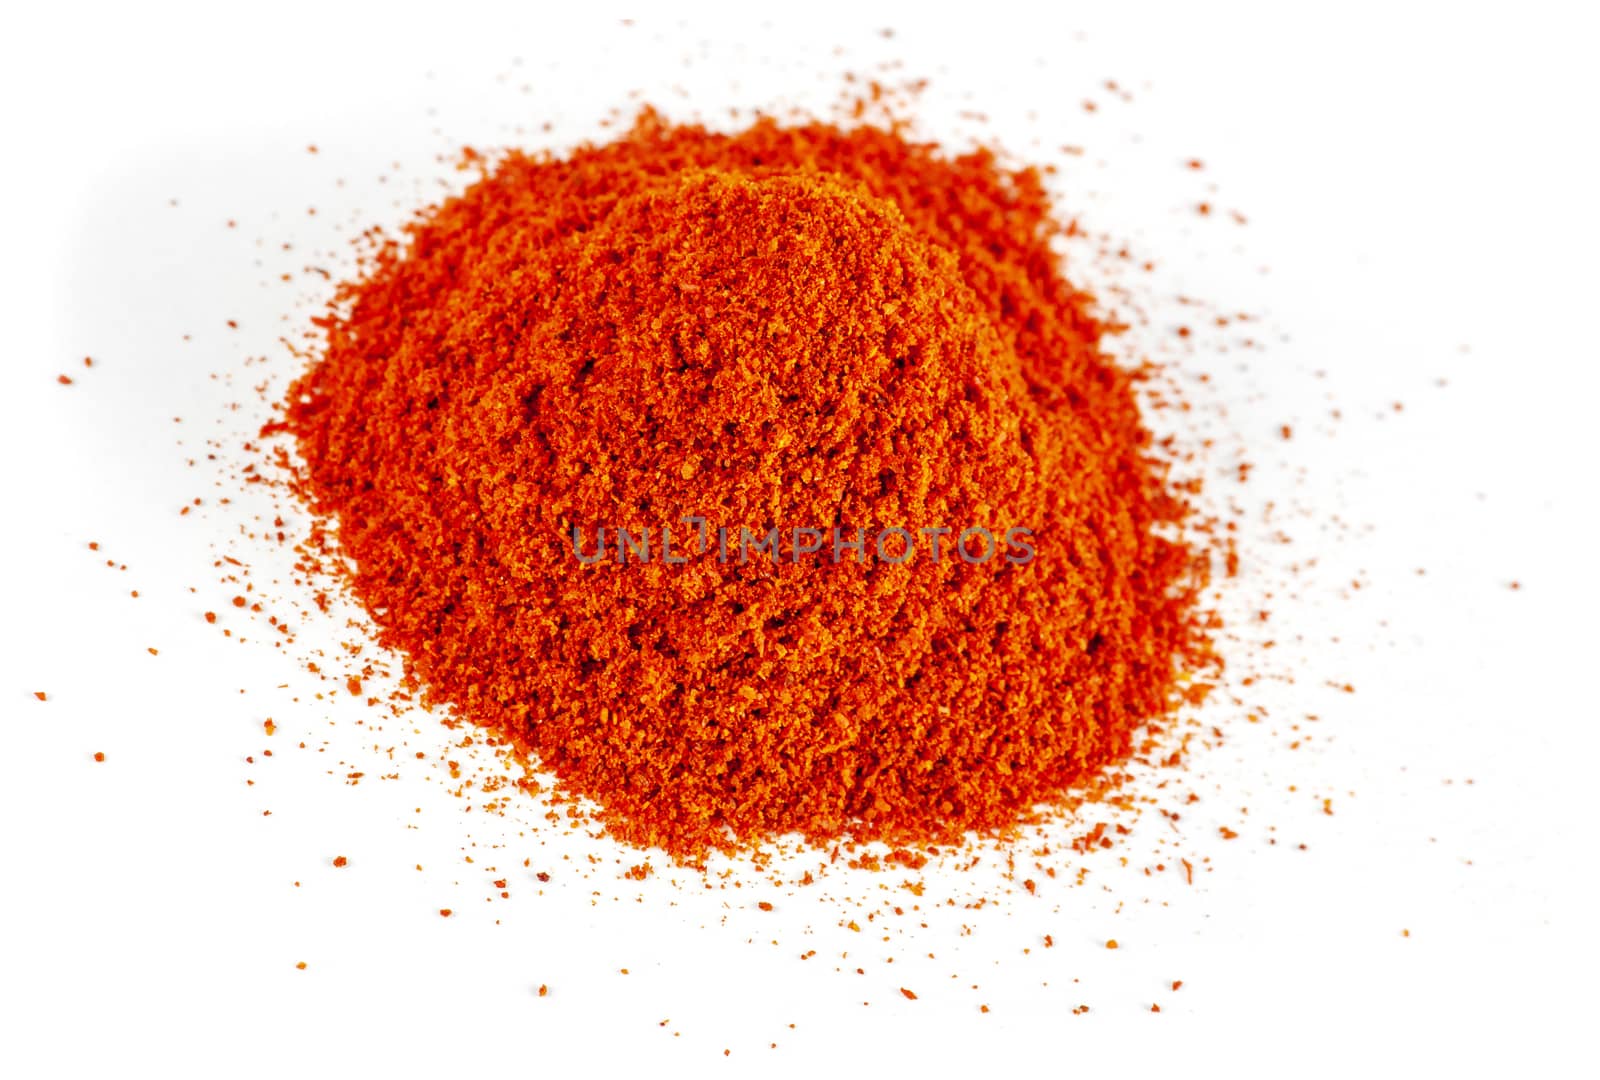 Pile of red pepper powder by red2000